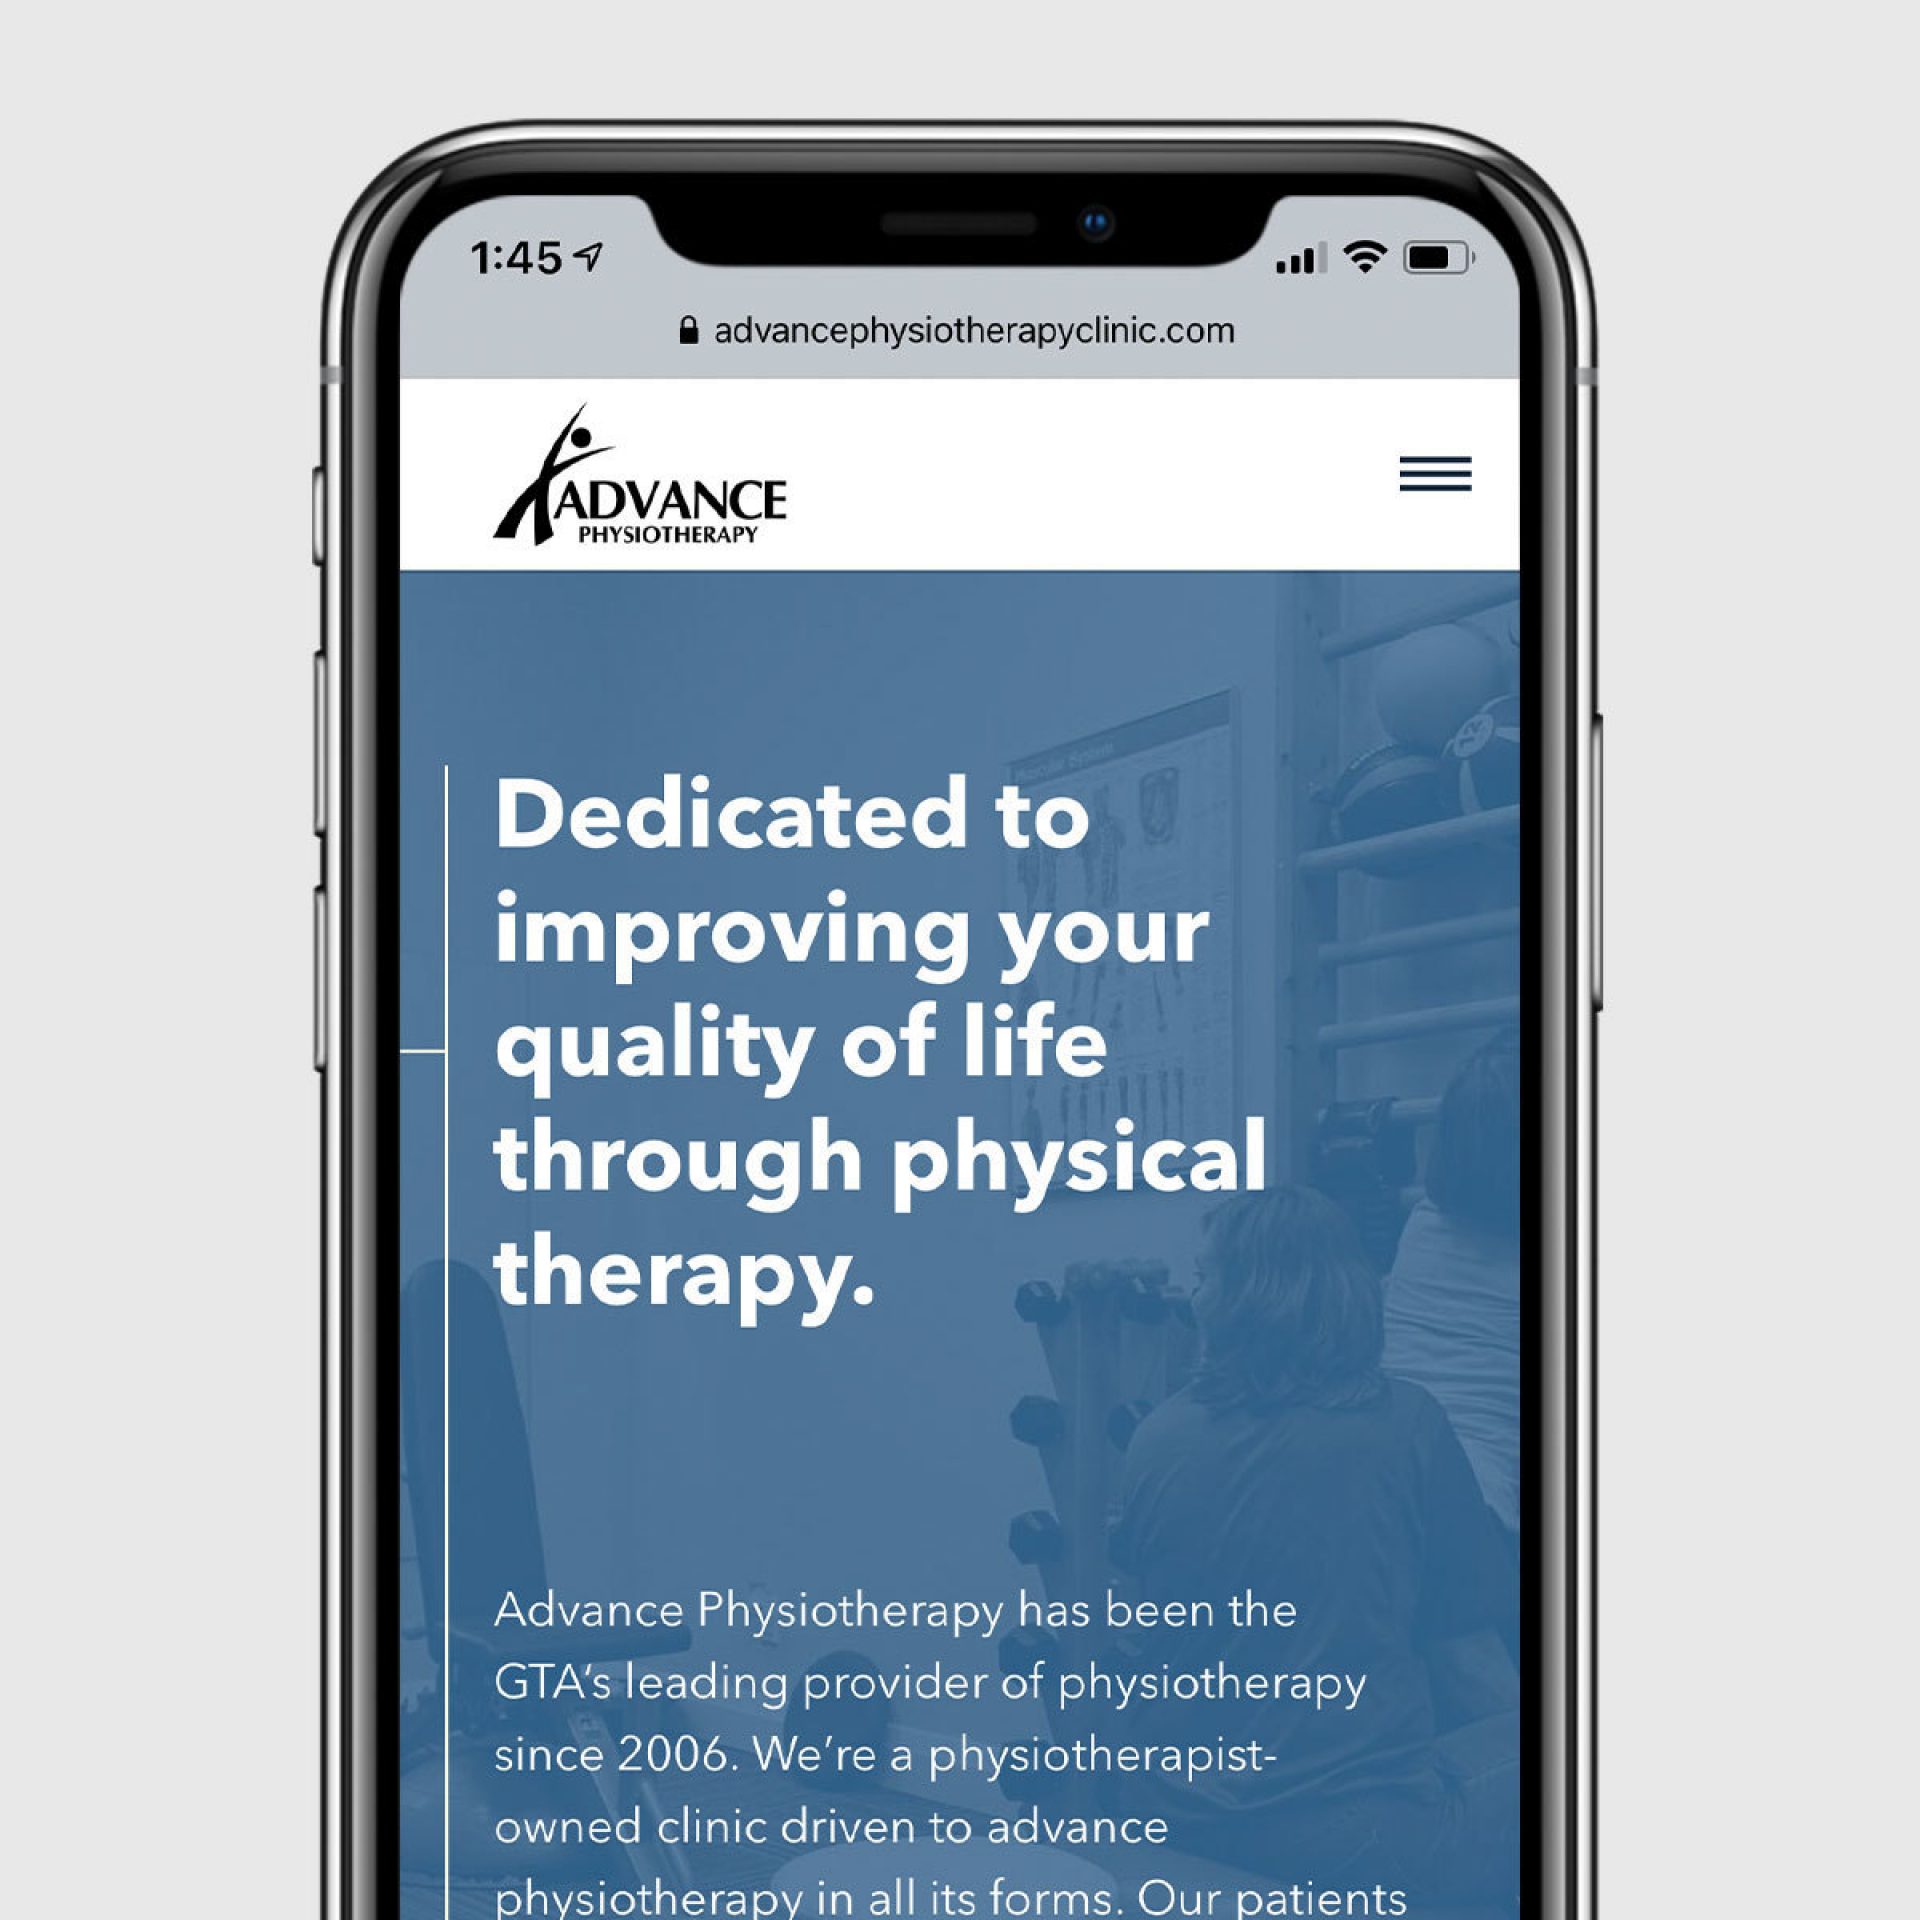 The home page of Advance Physio on a phone